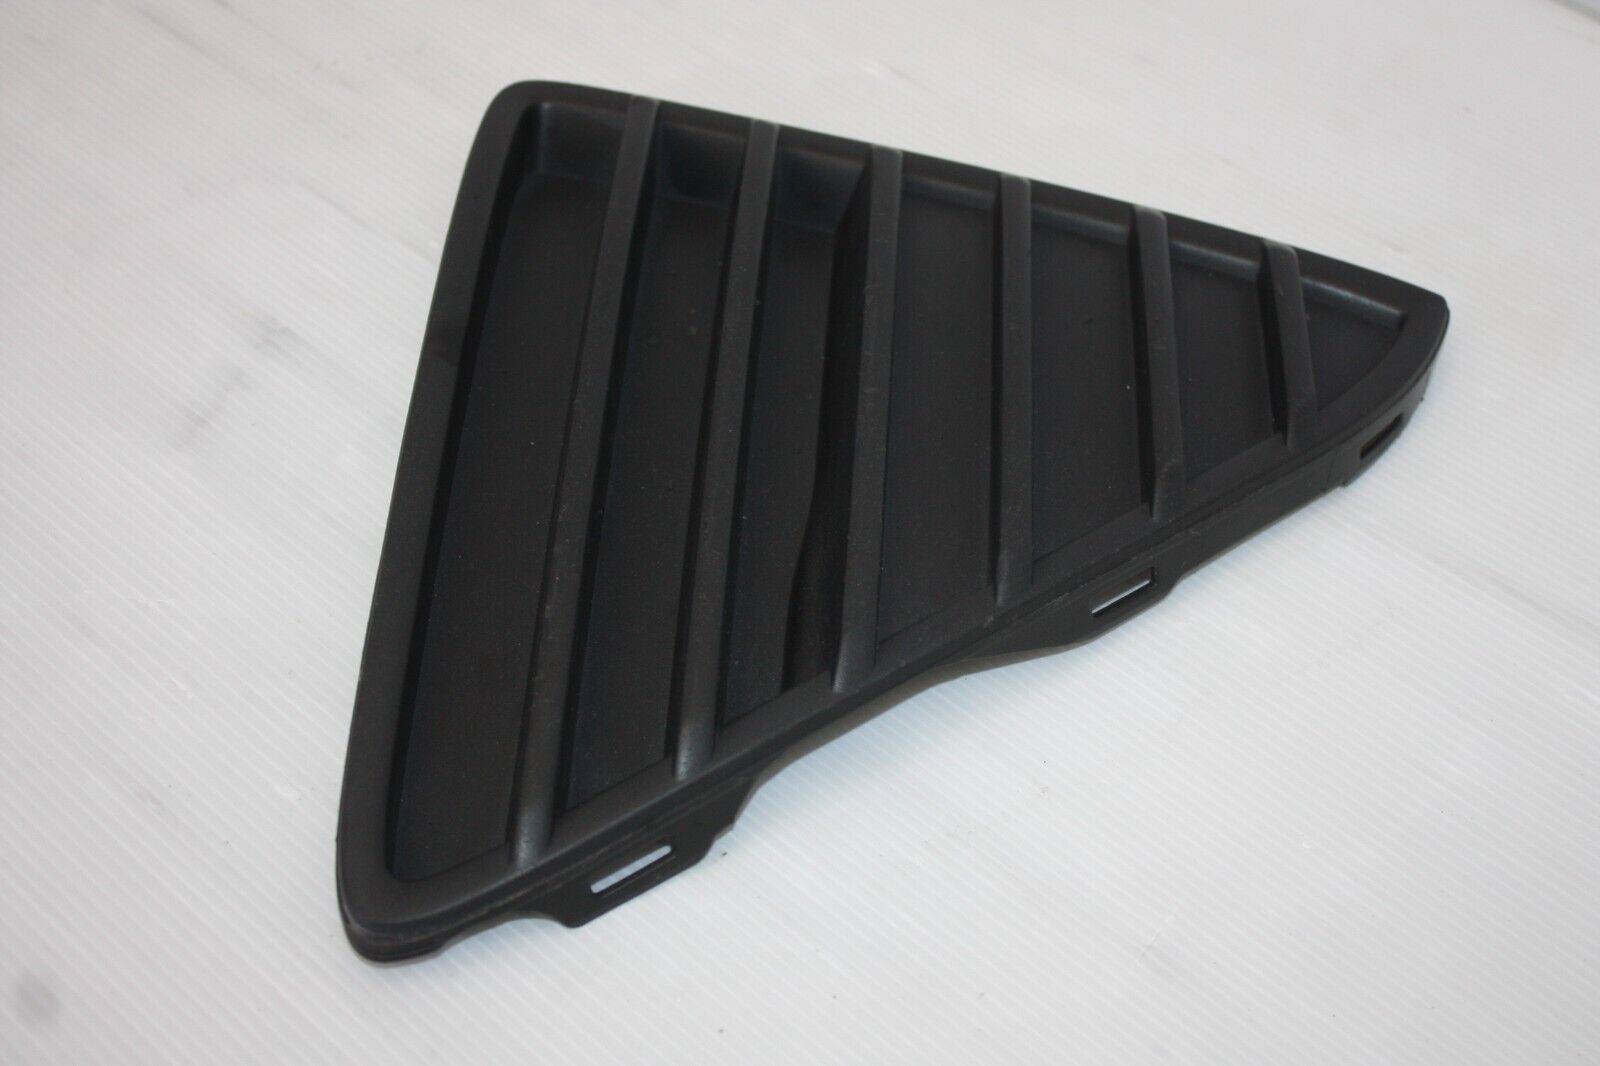 Ford-Focus-Front-Bumper-Left-Grill-2011-TO-2014-BM51-17947-A-Genuine-175574727982-11